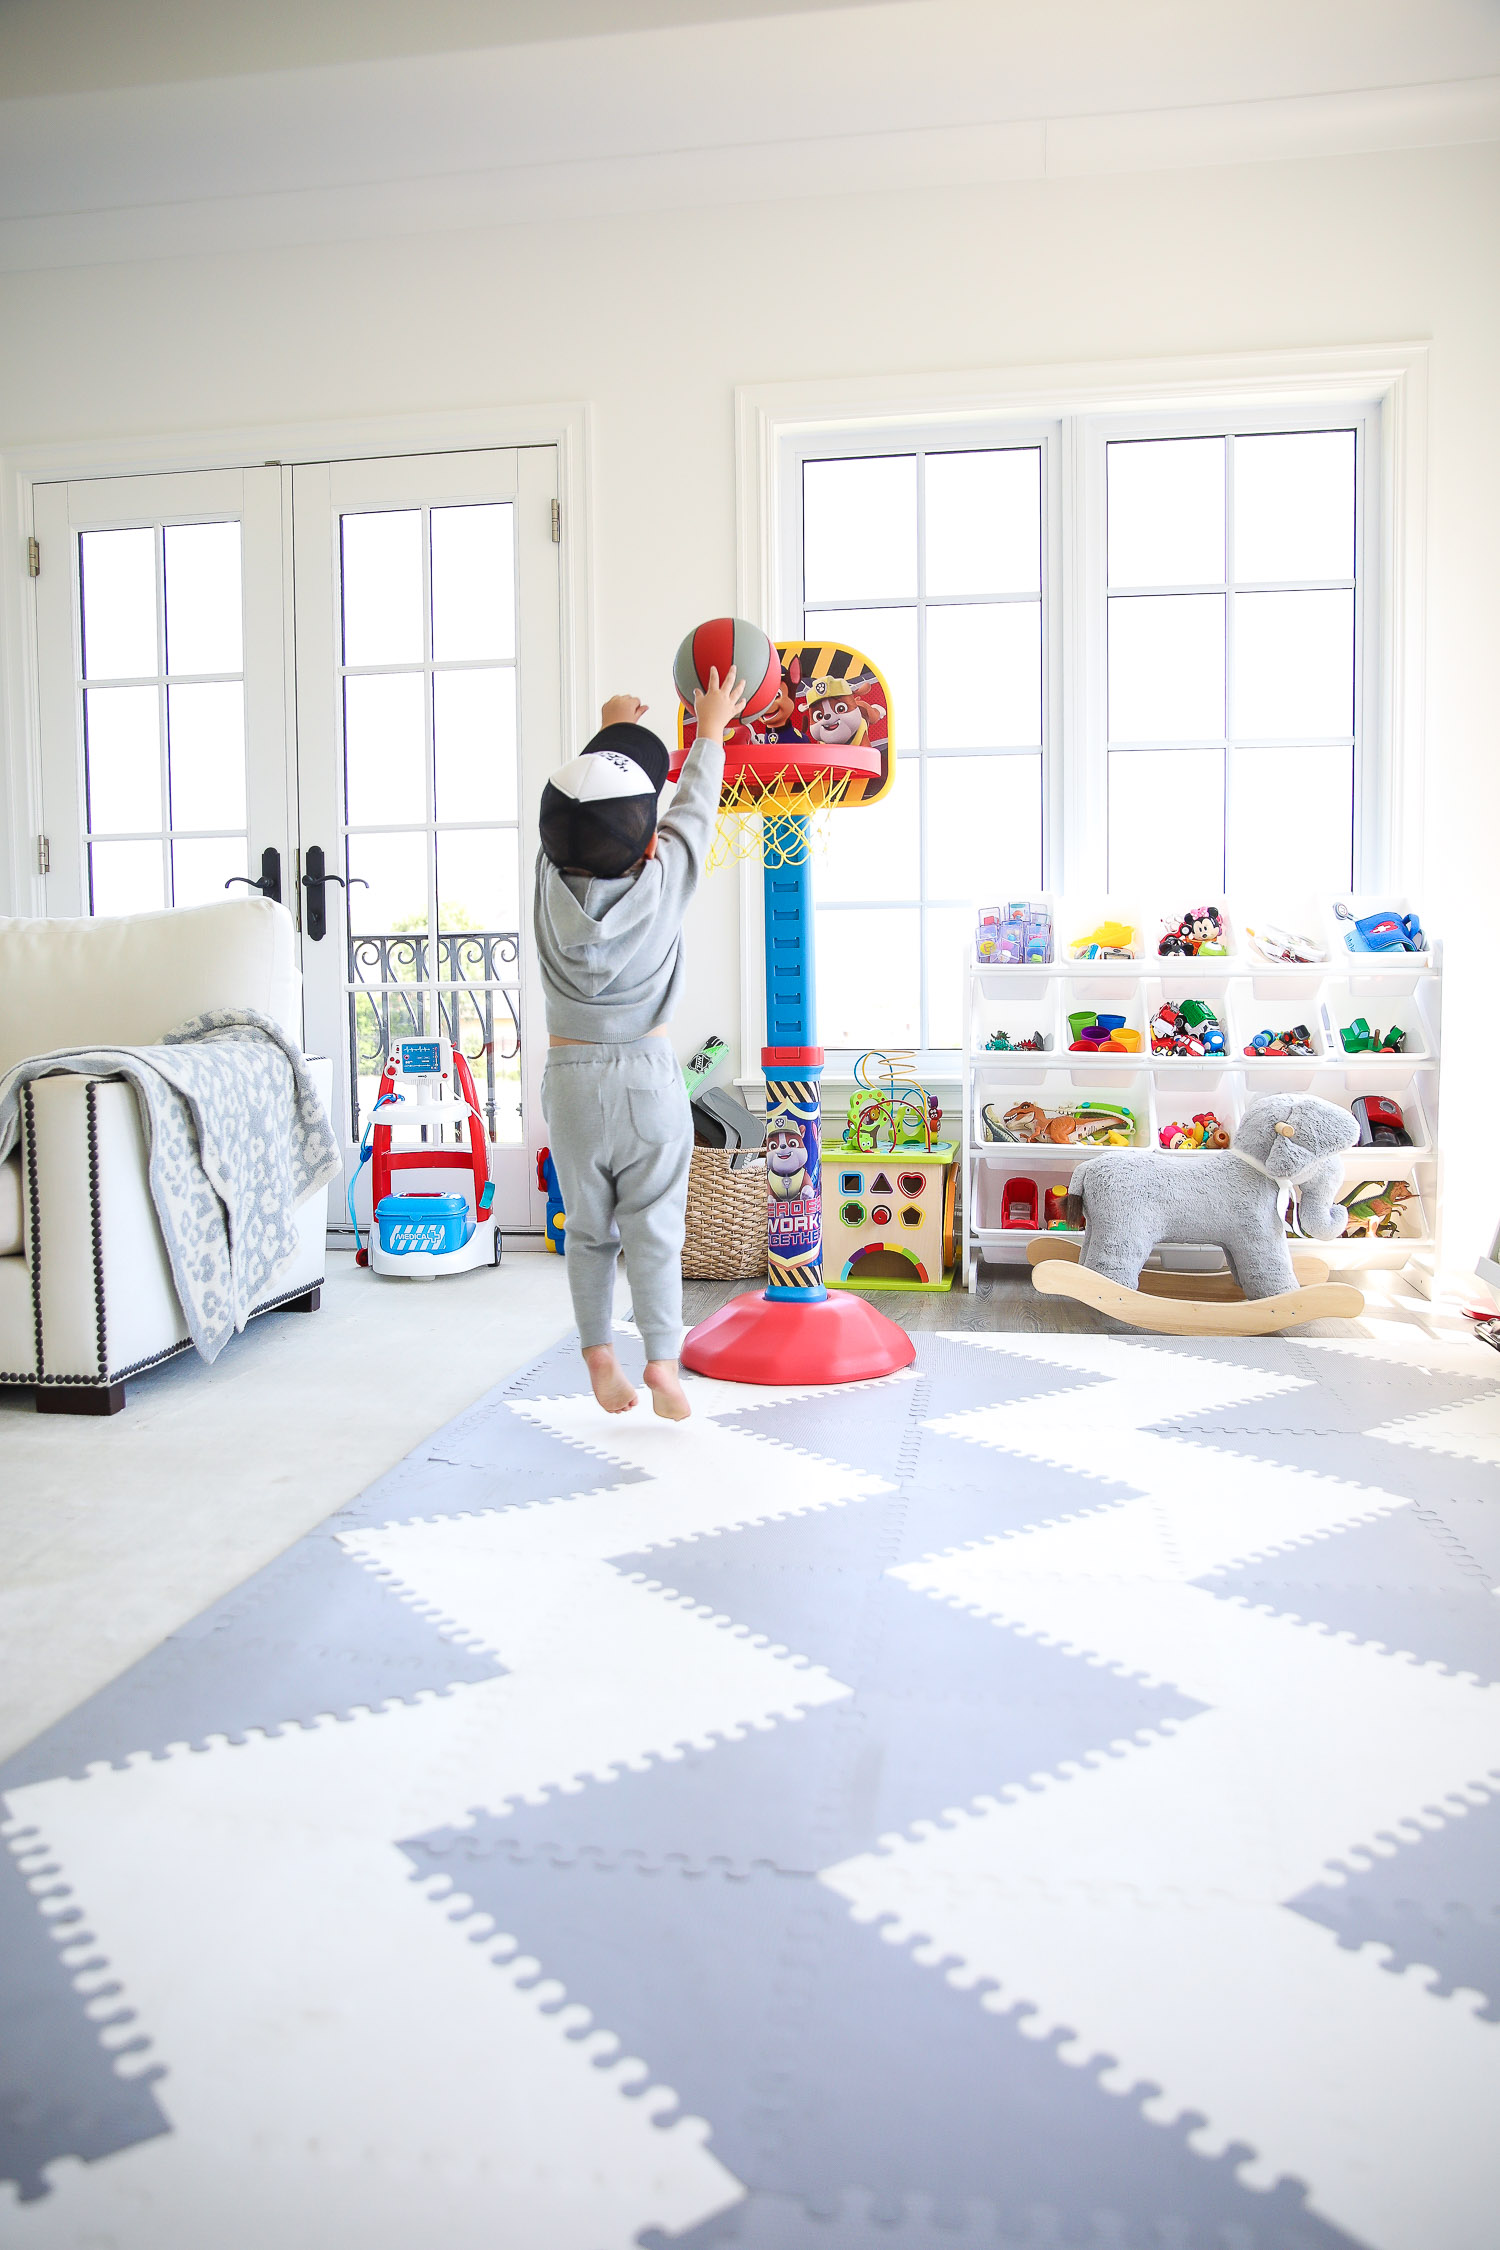 walmart kids home organization must haves, playroom organization ideas, emily gemma, the sweetest thing blog | Playroom Organization by popular US life and style blog, The Sweetest Thing: image of a playroom set up with a Walmart Humble Crew Super-Sized Toy Organizer with 16 Plastic Bins, foam flooring, basketball hoop, and rocking elephant. 